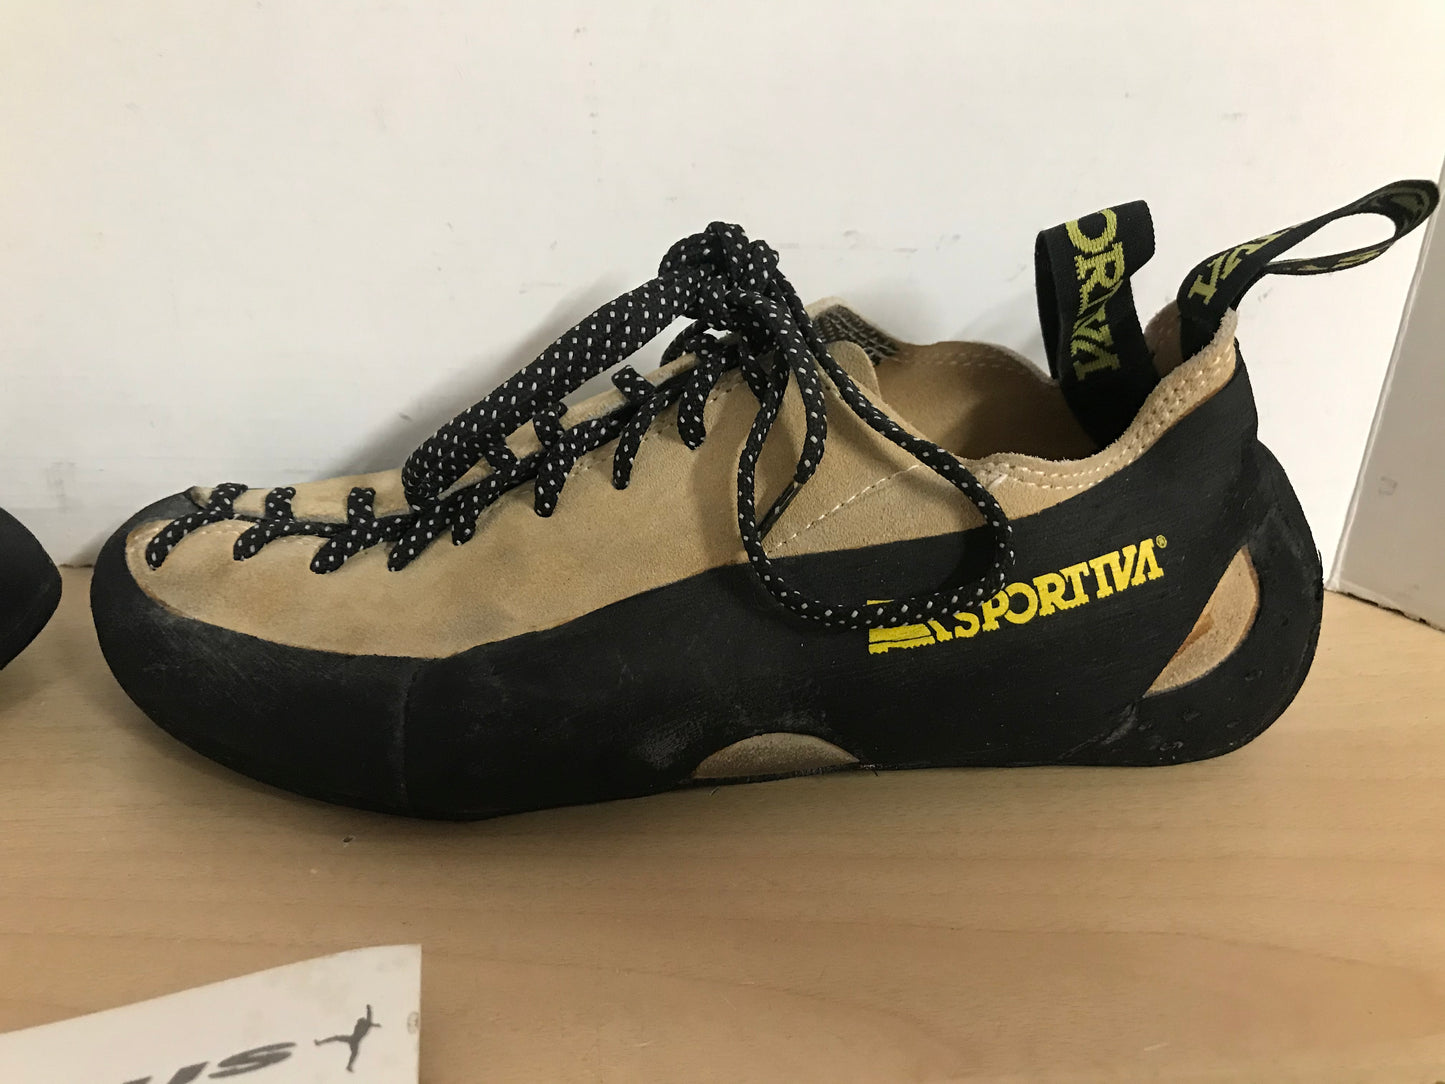 Rock Climbing Shoes Ladies Size 8.5 LaSportiva Excellent With New Bag Chalk